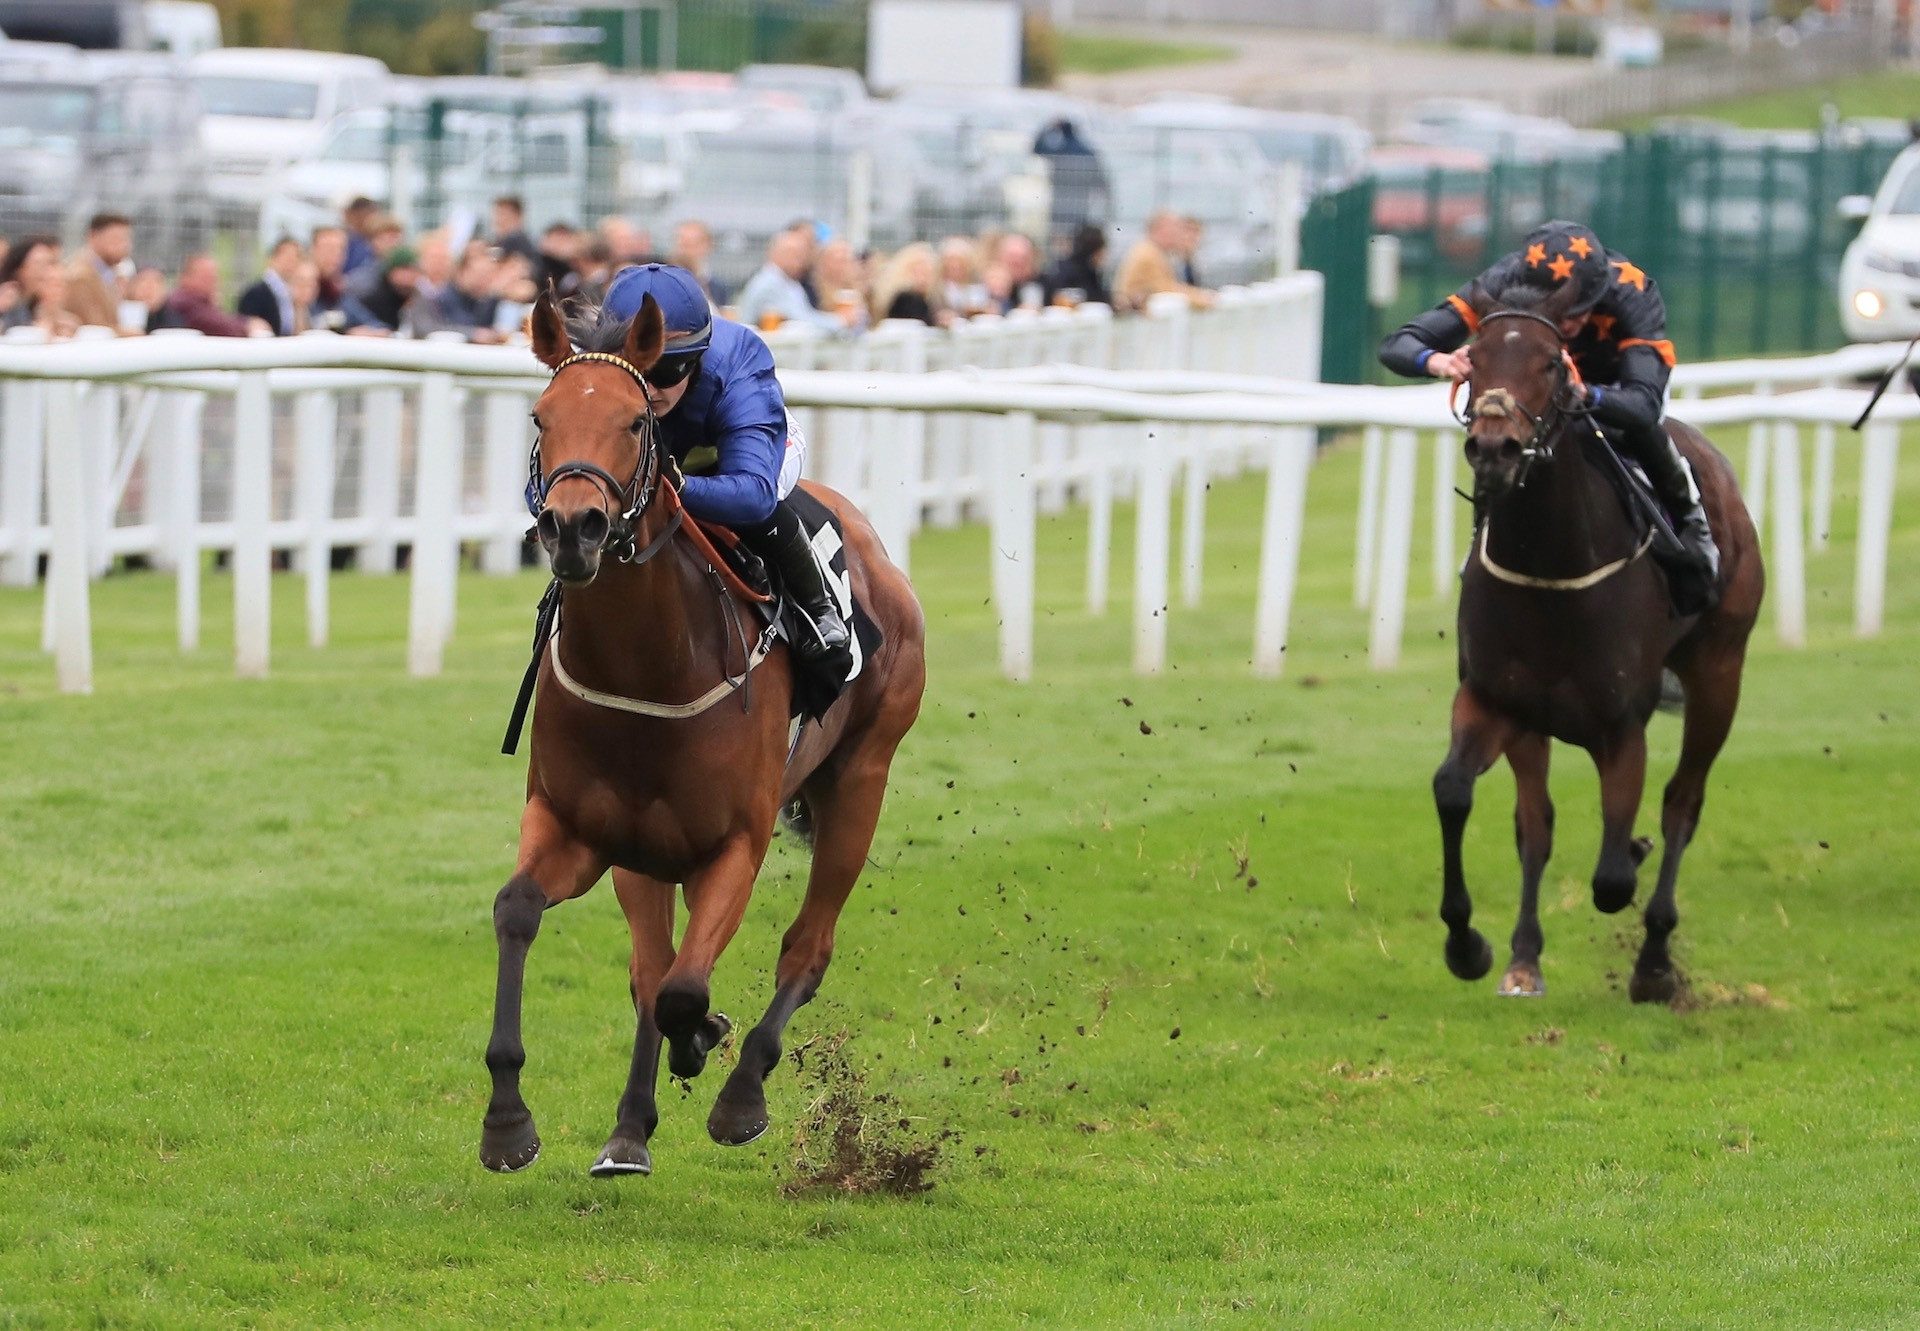 Jumbly (Gleneagles) Wins The Listed Radley Stakes At Newbury